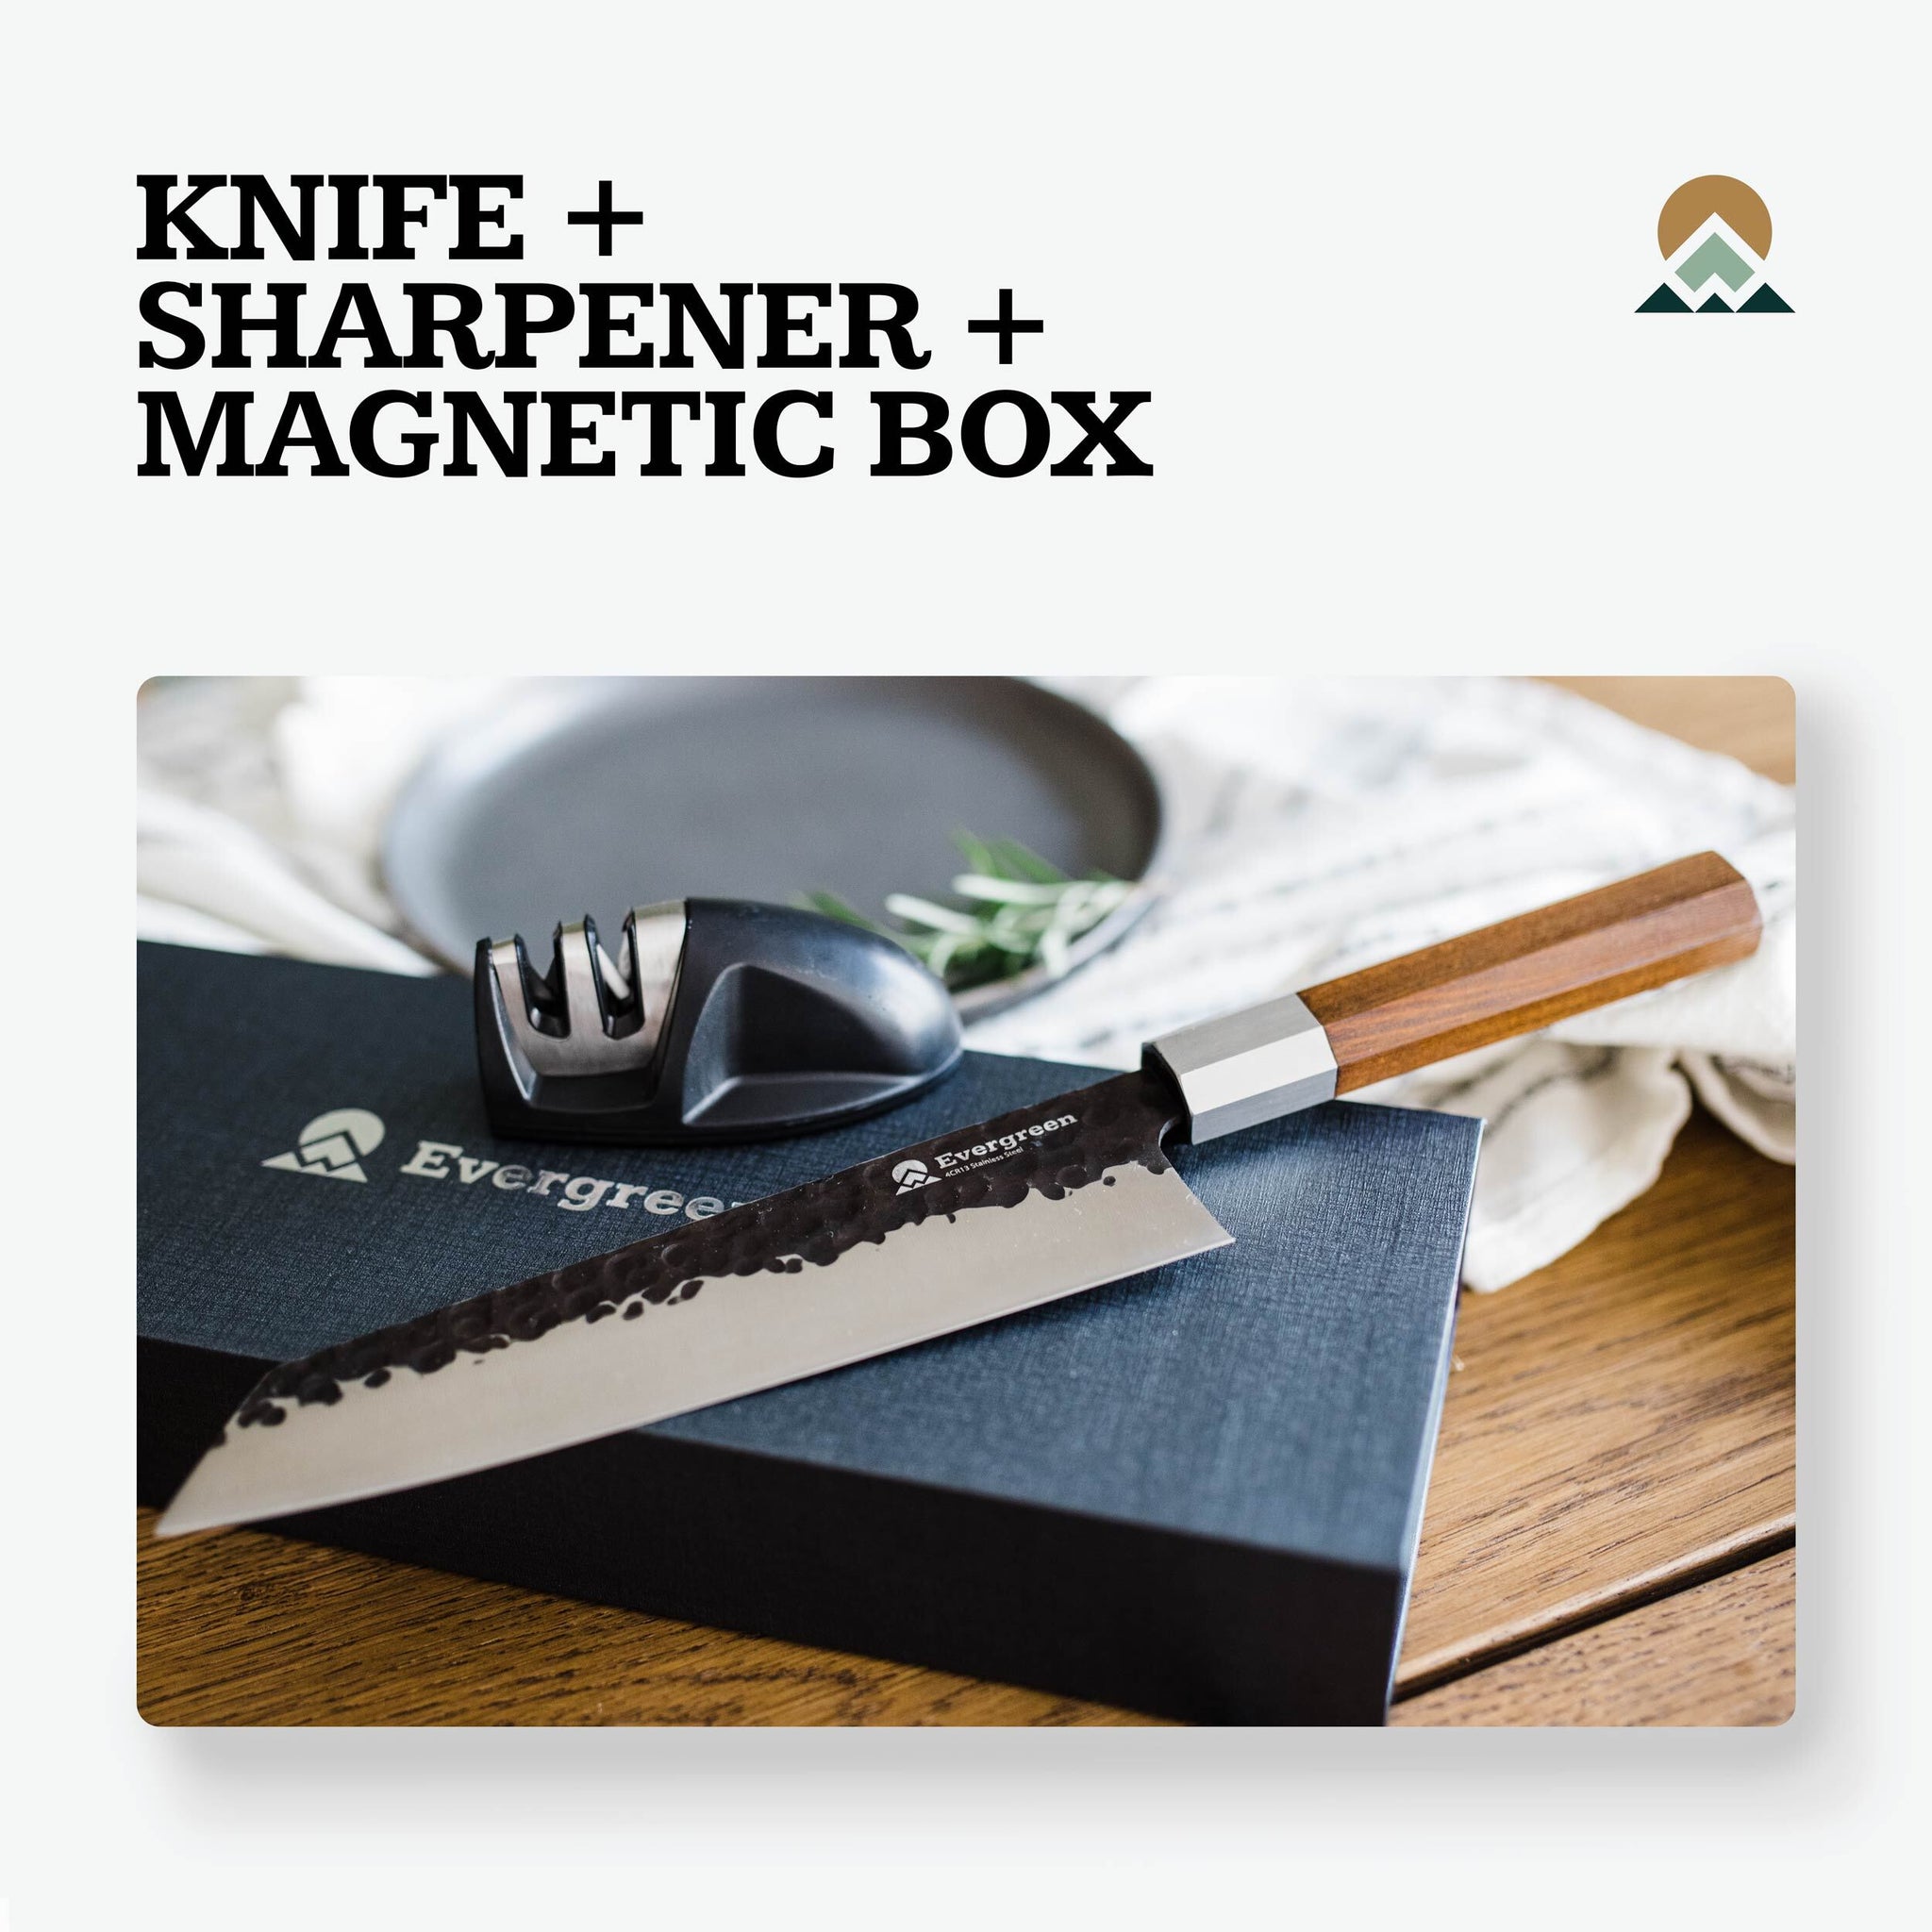 Evergreen 8” Professional Classic Chef Knife, Stainless Steel, Great for Paring, Dicing, Cutting with Octagon Wood Handle, Blade Sharpener and Gift Box